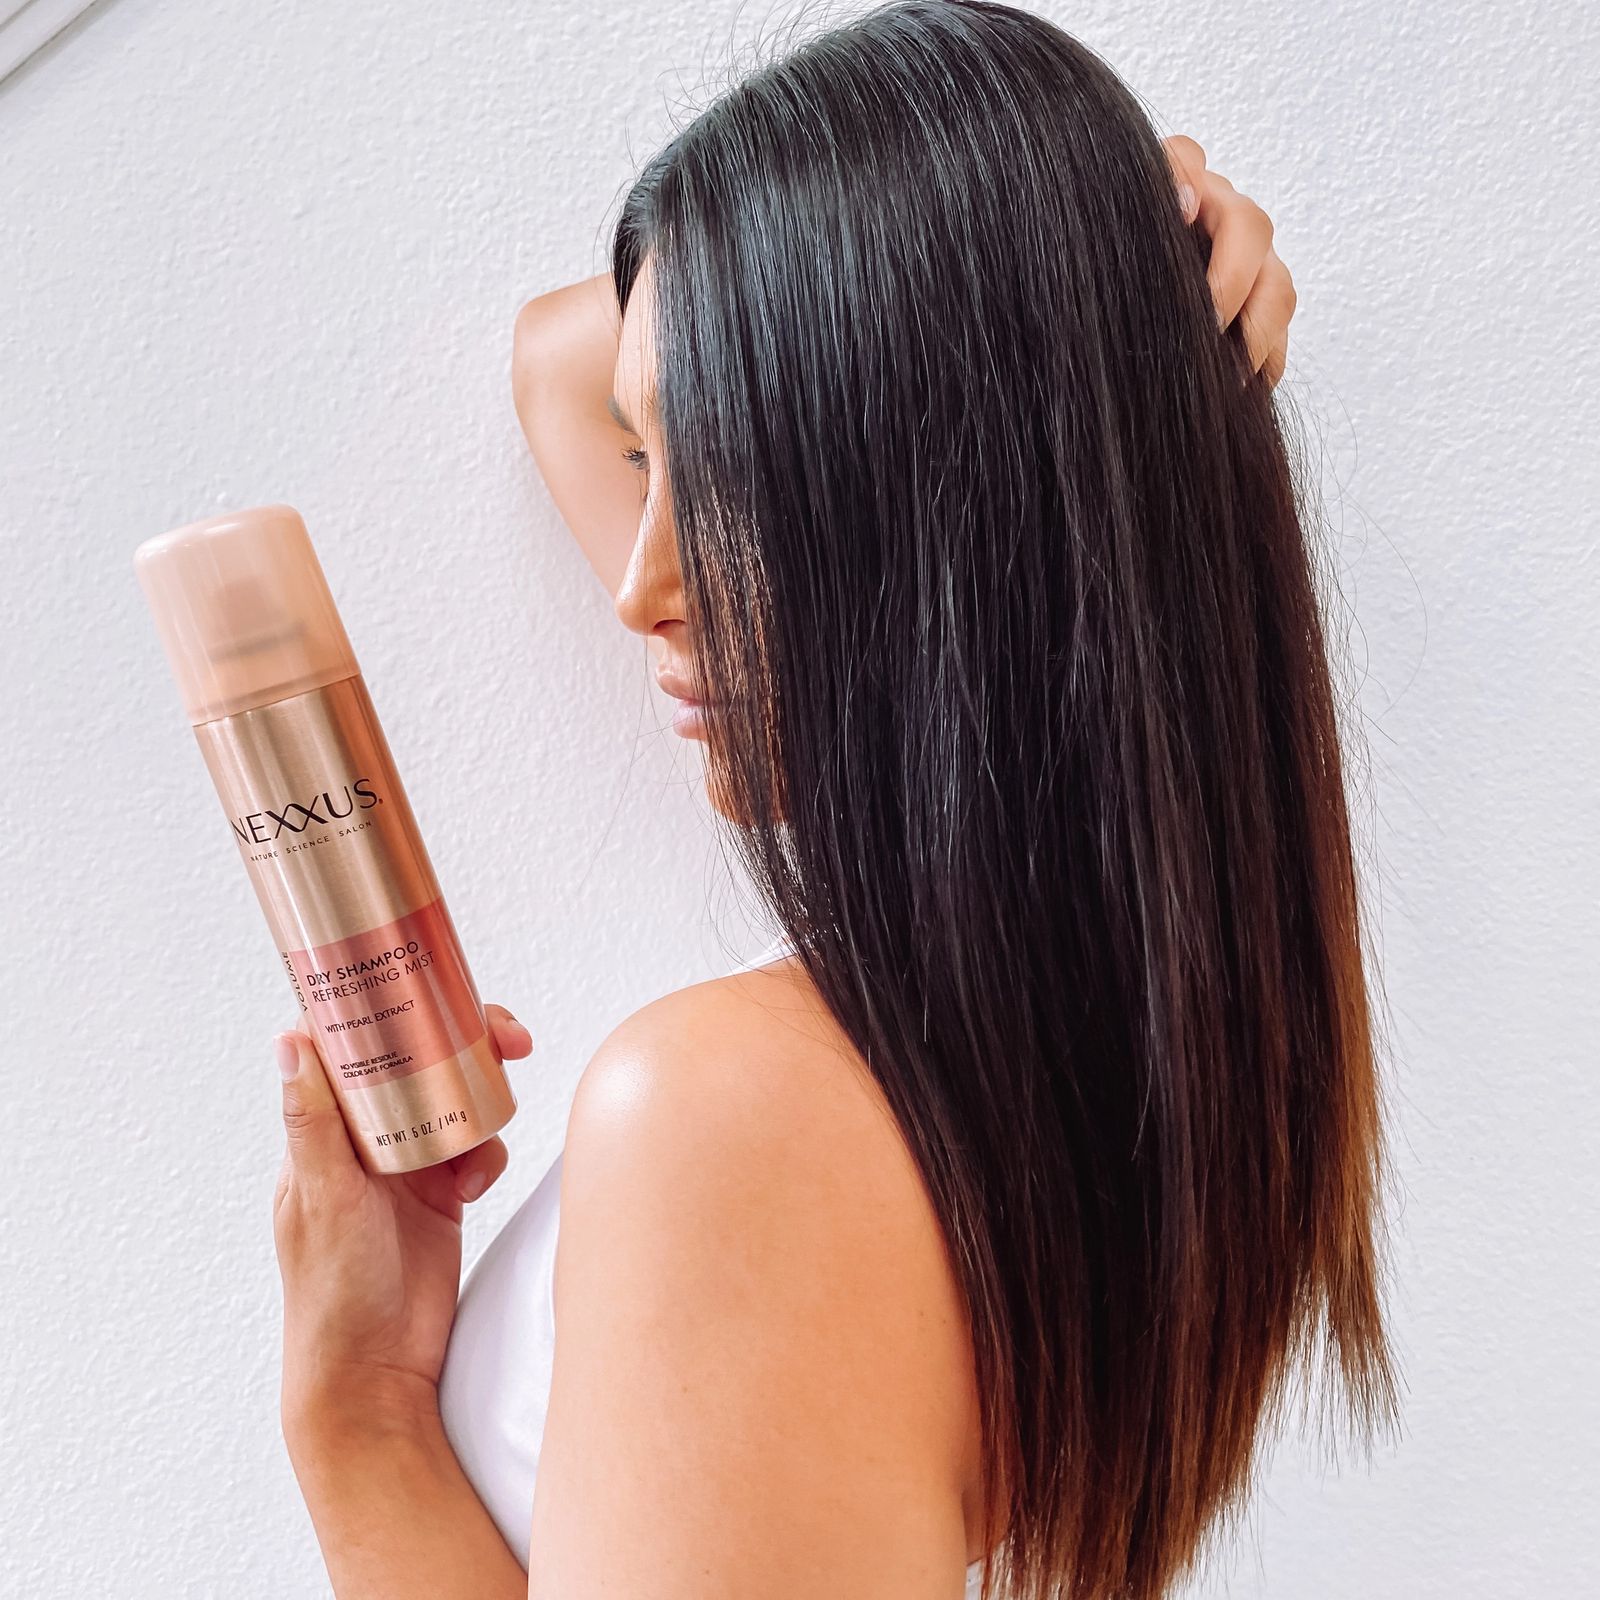 The Do's and Don'ts of Dry Shampoo - Nexxus US